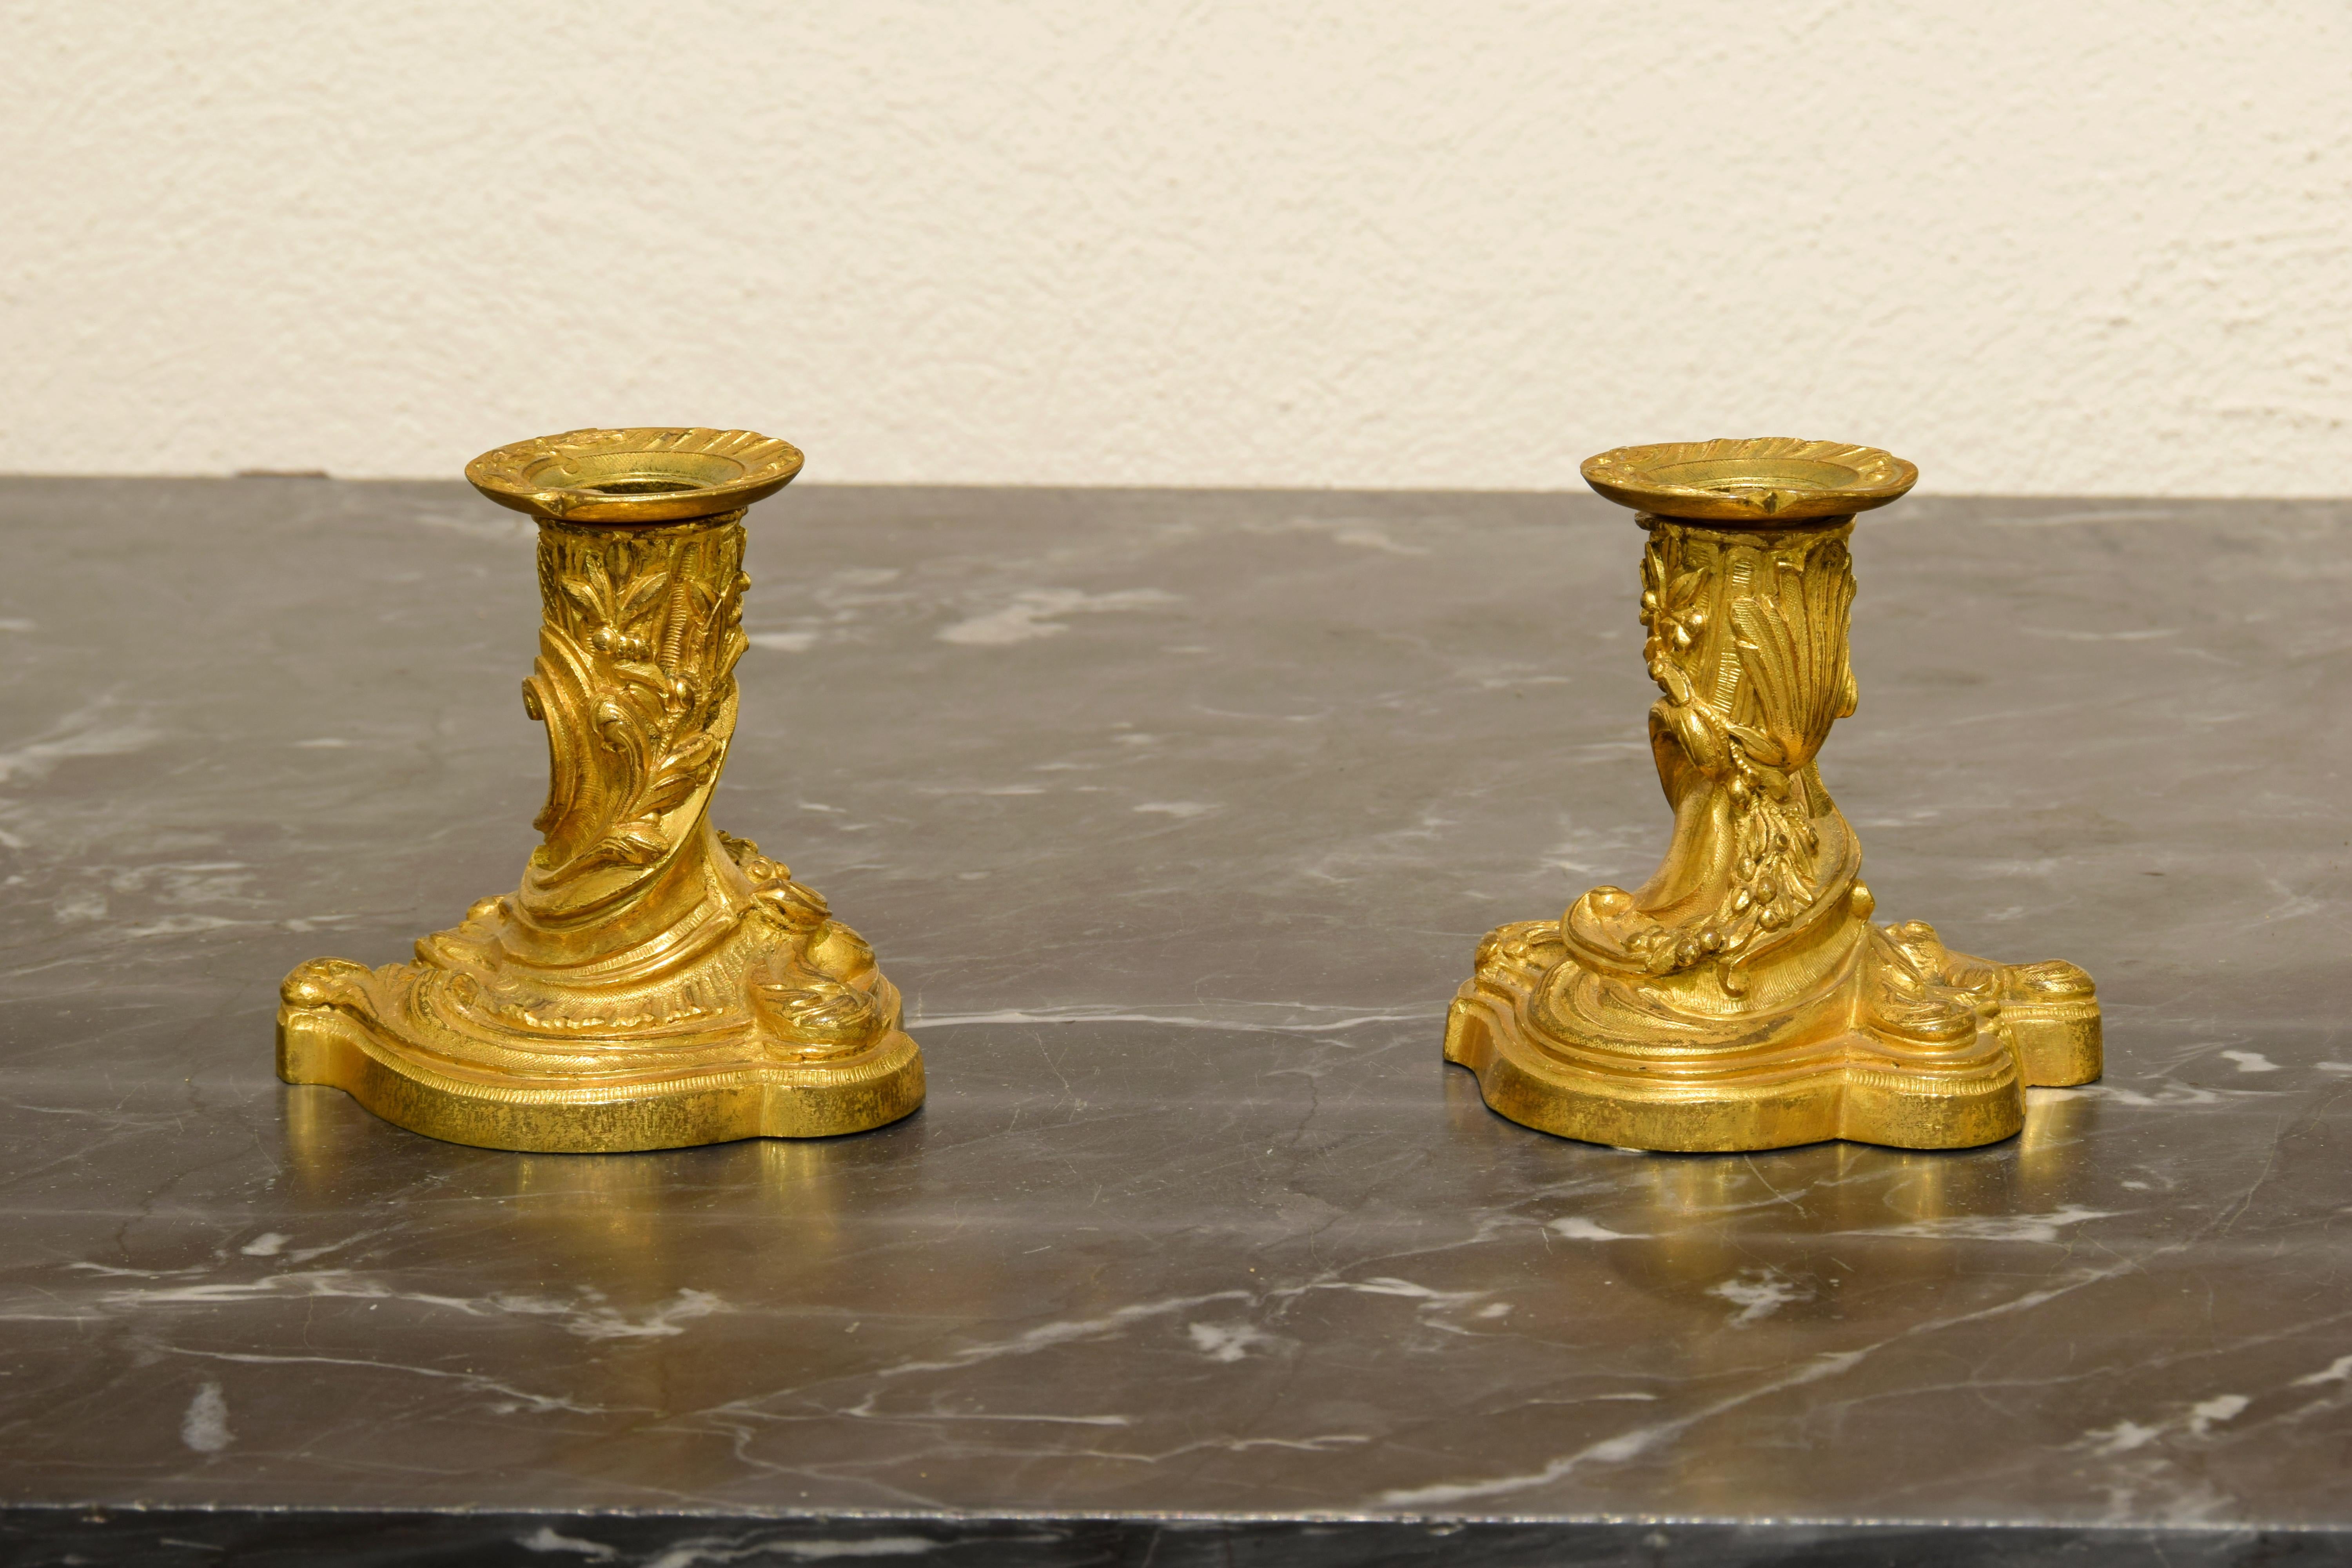  19th Century, Pair of French Gilt Bronze Candlesticks, Louis XV Style For Sale 12